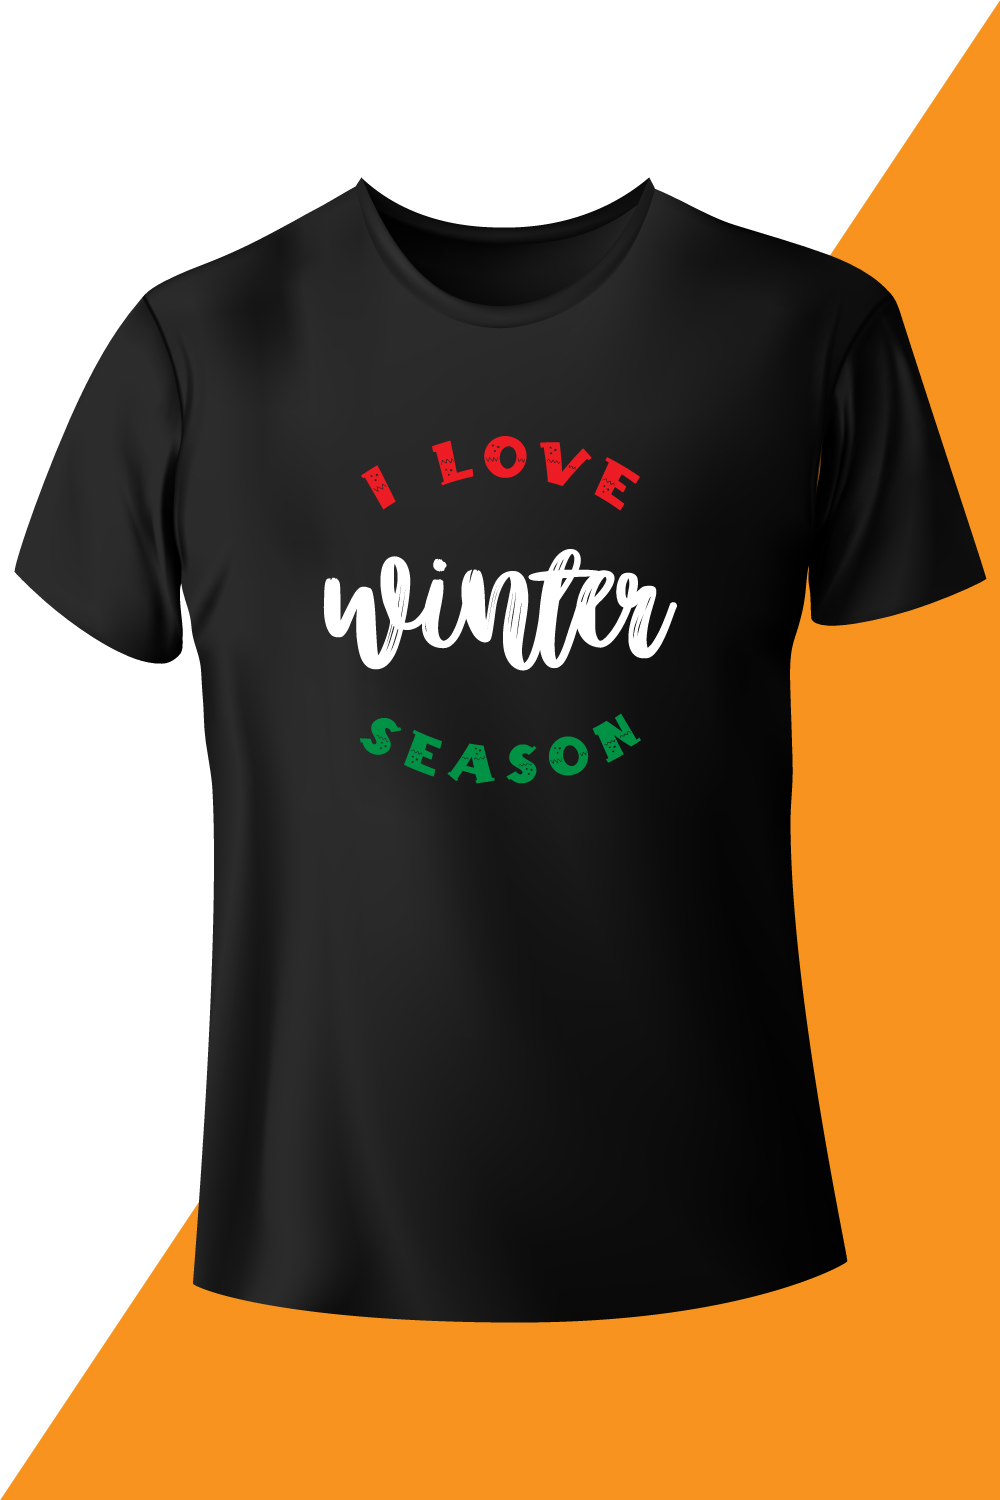 Image with a black t-shirt with an enchanting inscription i love winter season.